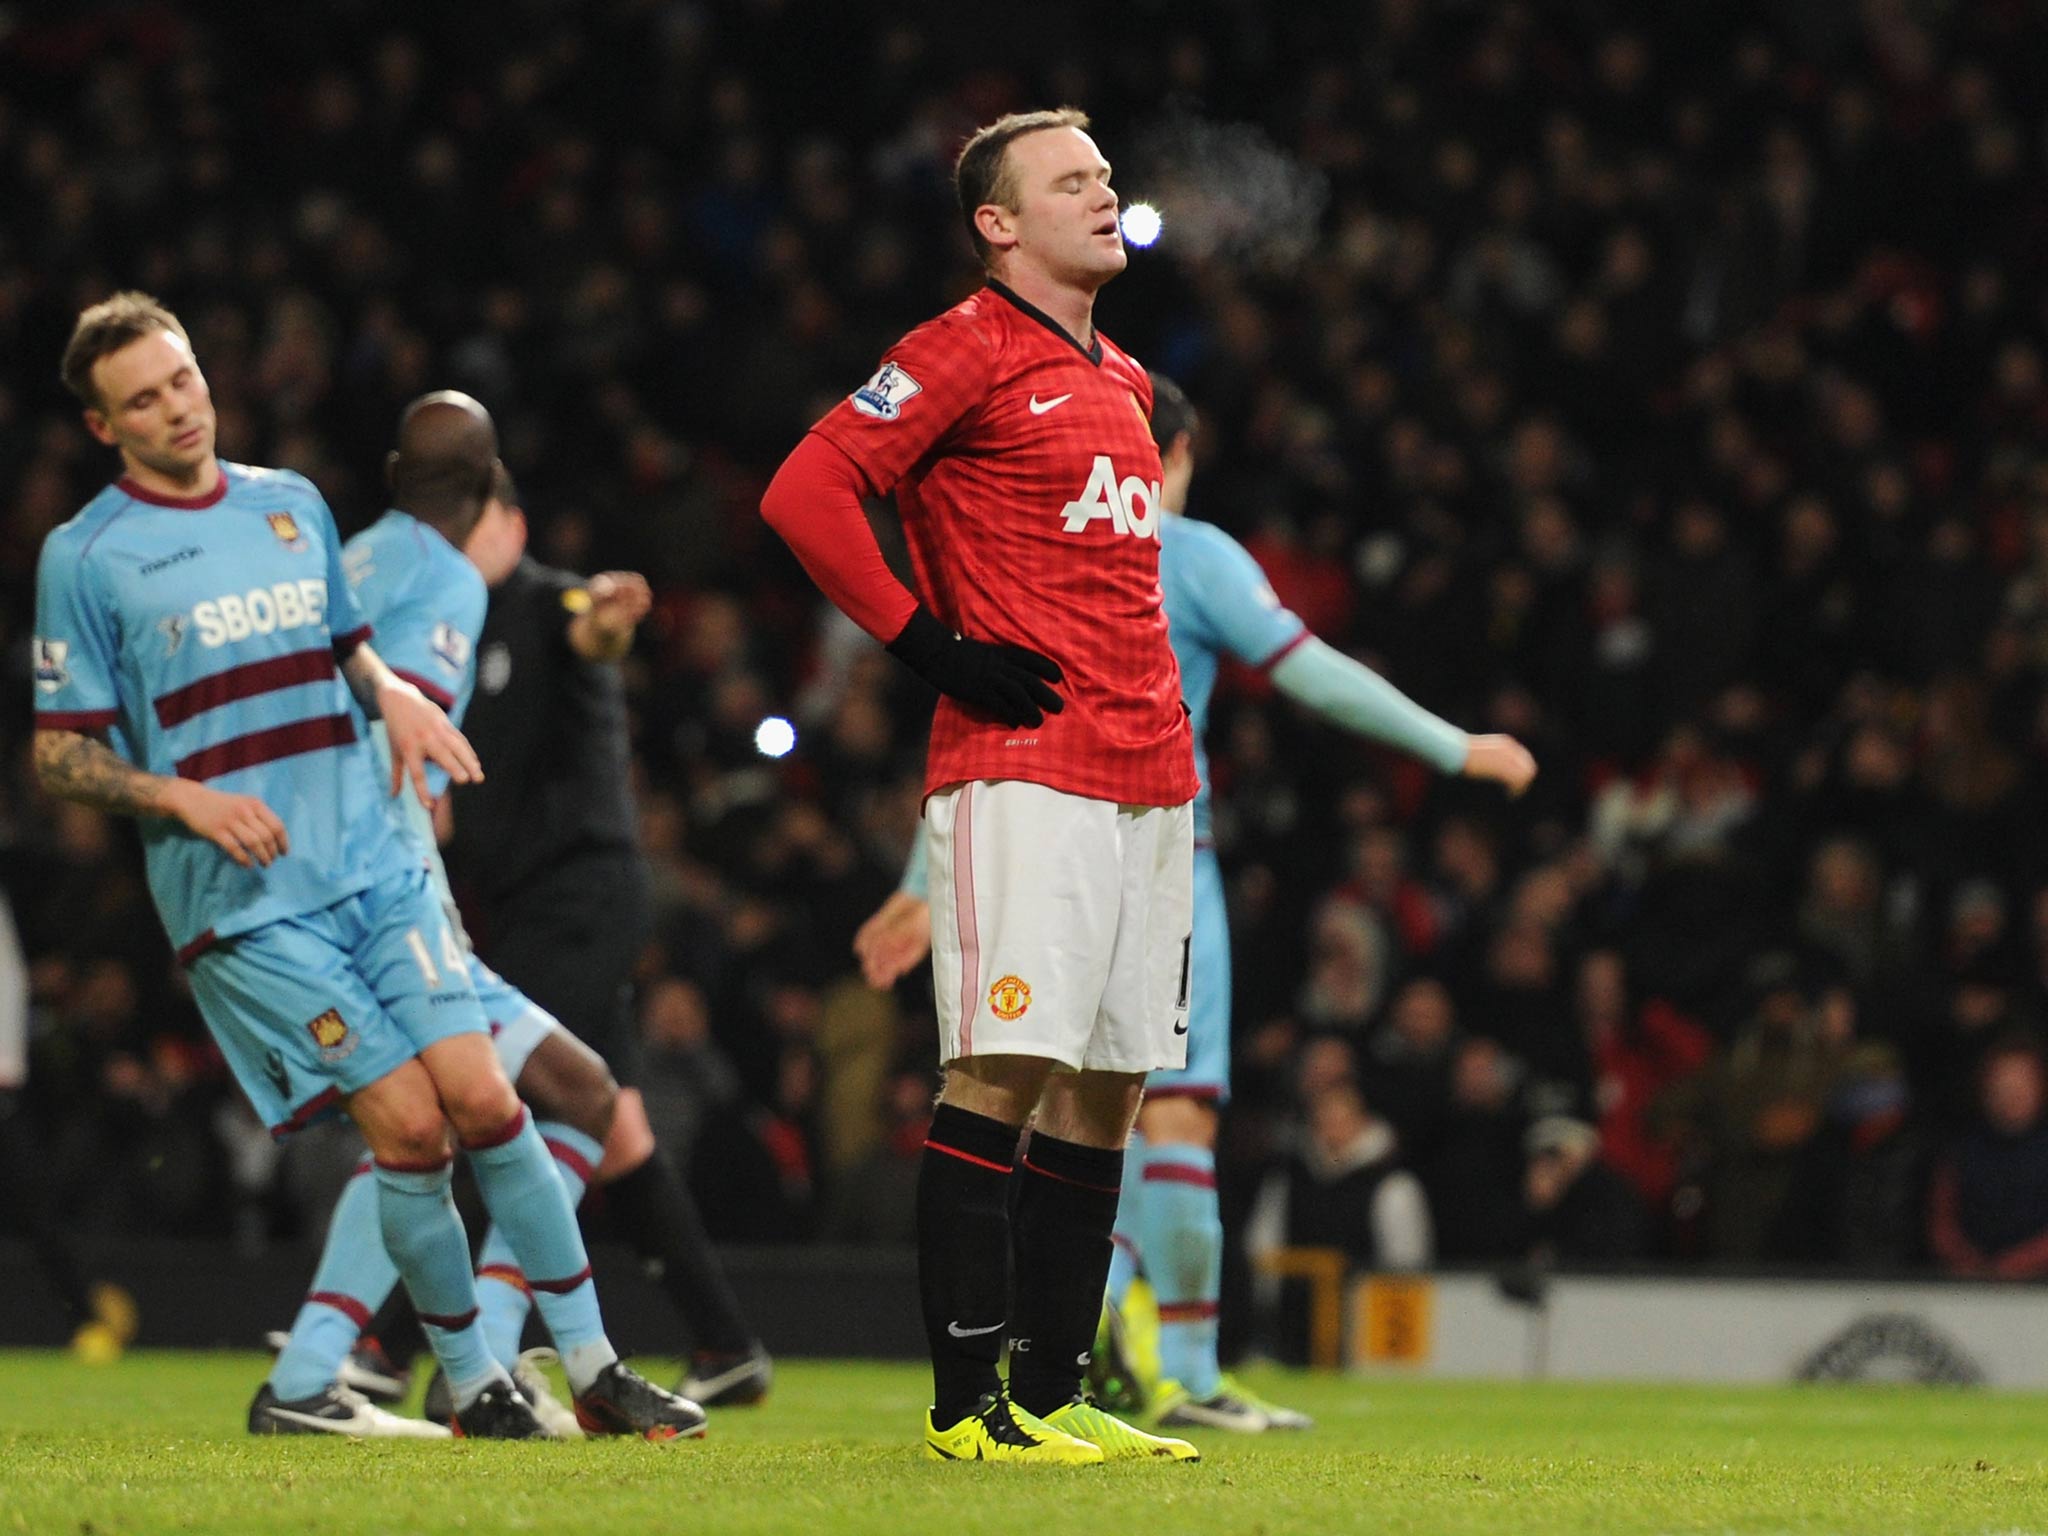 Wayne Rooney blasts the ball over the bar from the penalty spot against West Ham